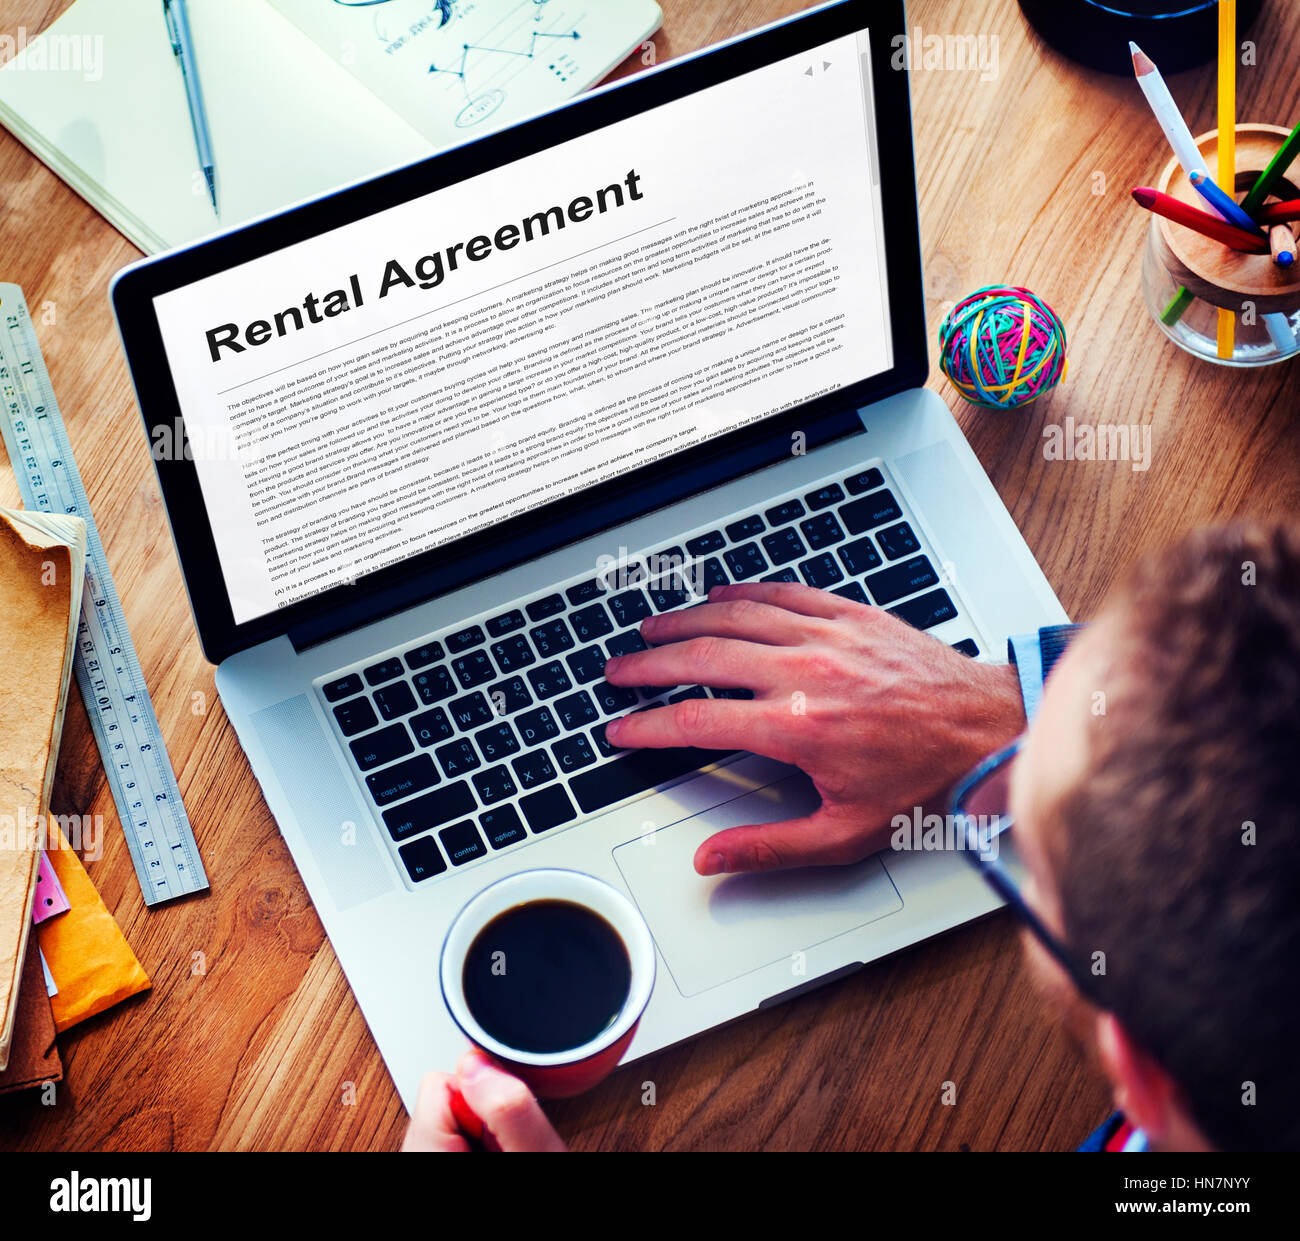 Rental Agreement Assets Concept Stock Photo